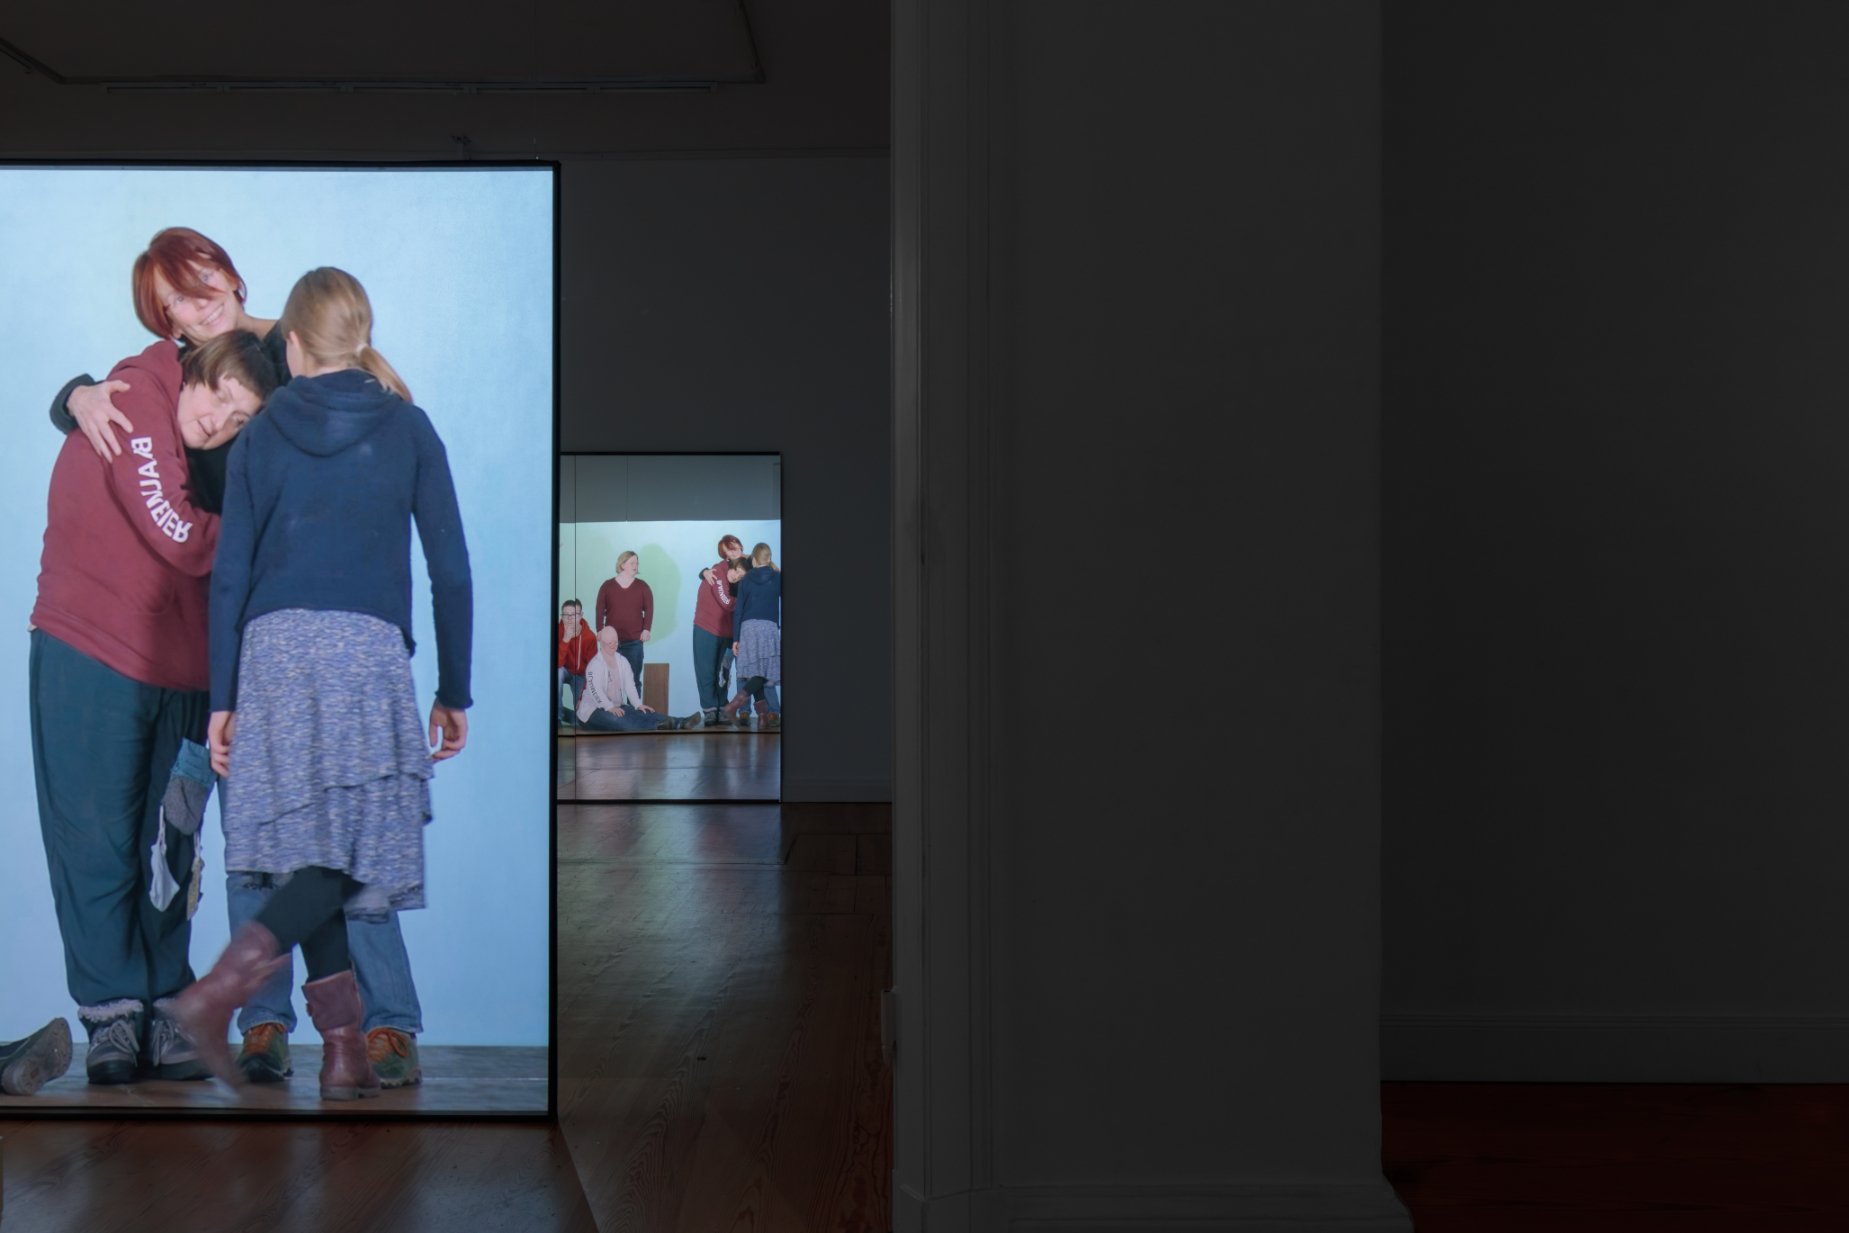  Dudu Quintanilha Installation view,  Mirror   (2023) 1-channel-video installation, 4K, color, sound, languages German and English, 7 min. 8 sec. Produced in collaboration with Julian Kiesche, Finn Westphal, Eric Wälz, Christoph Dziallas and Blaumeie